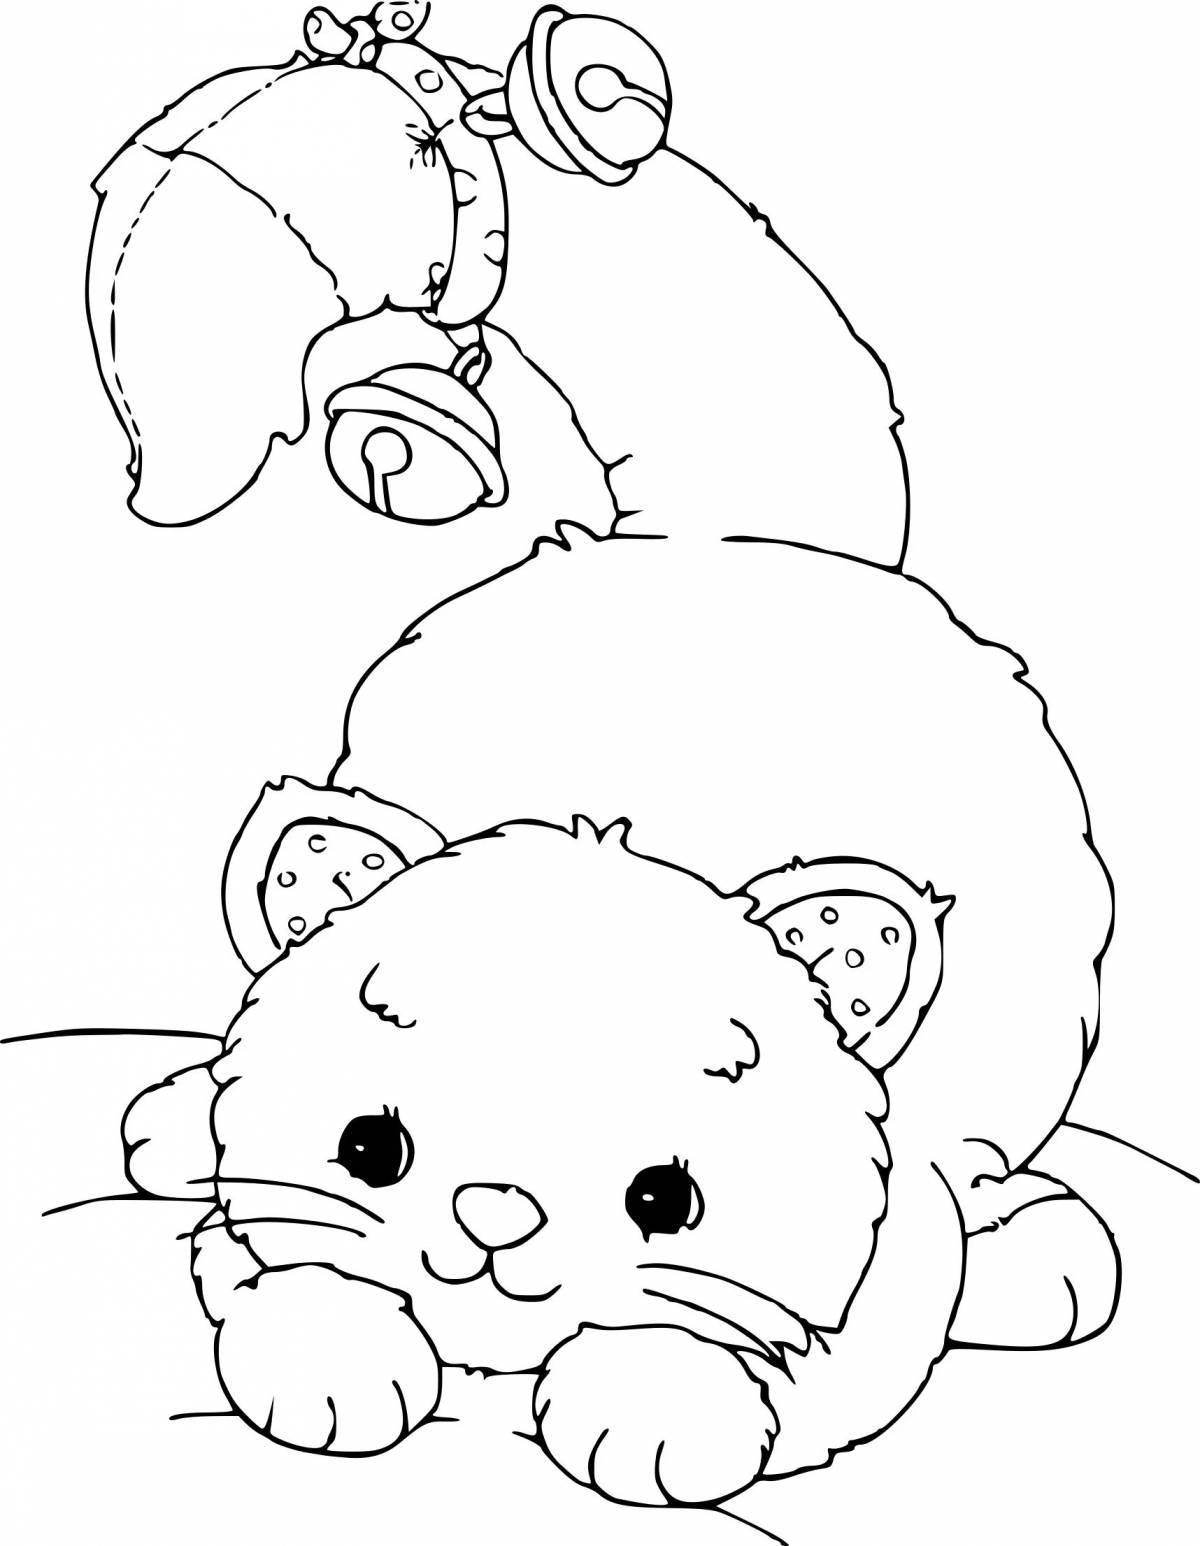 Joyful lily kitty and bass coloring book